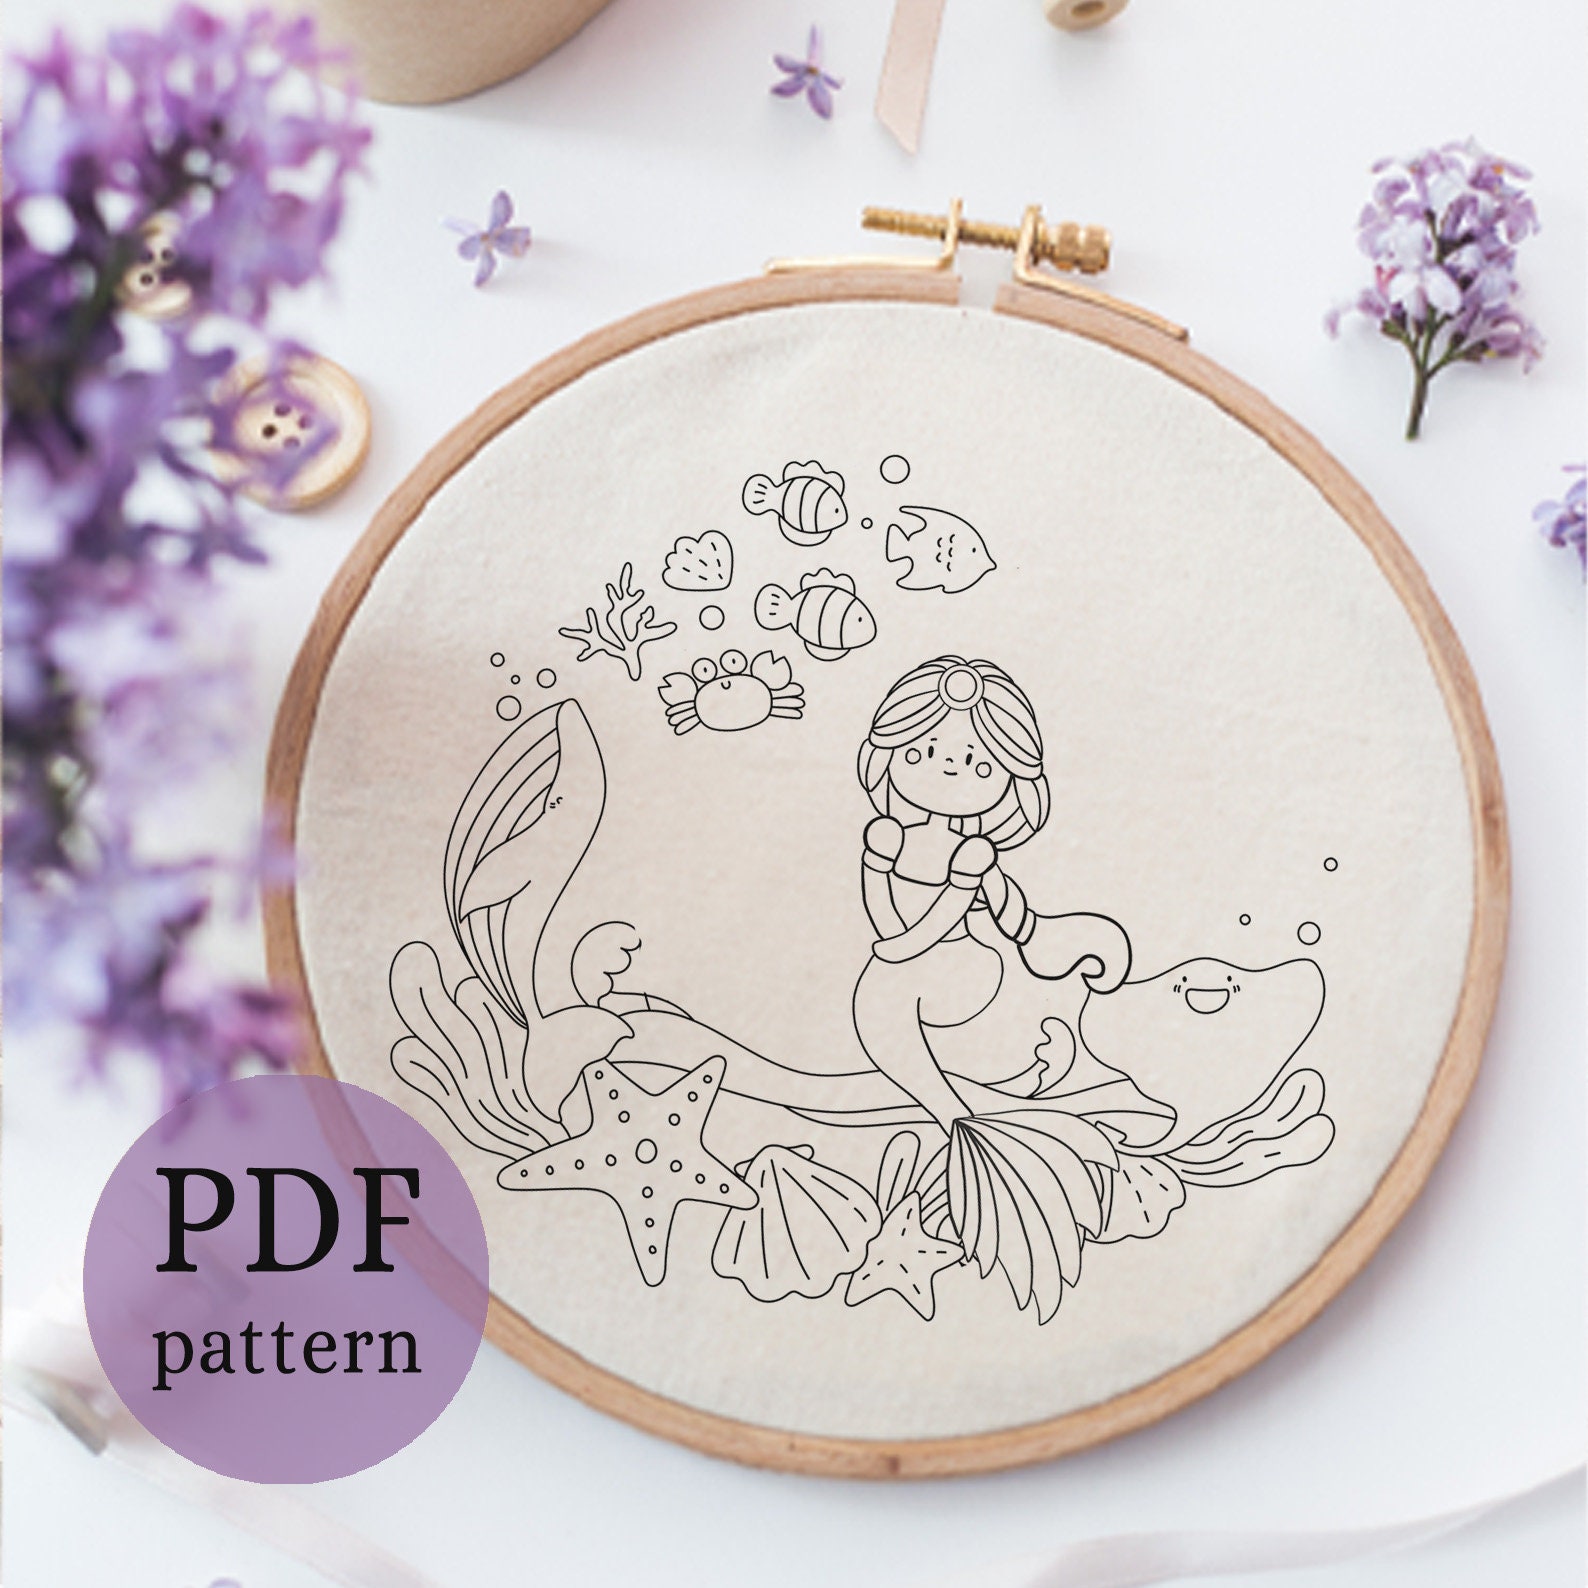 Mermaid Wishes - Hand Stitch Embroidery Transfer Pattern